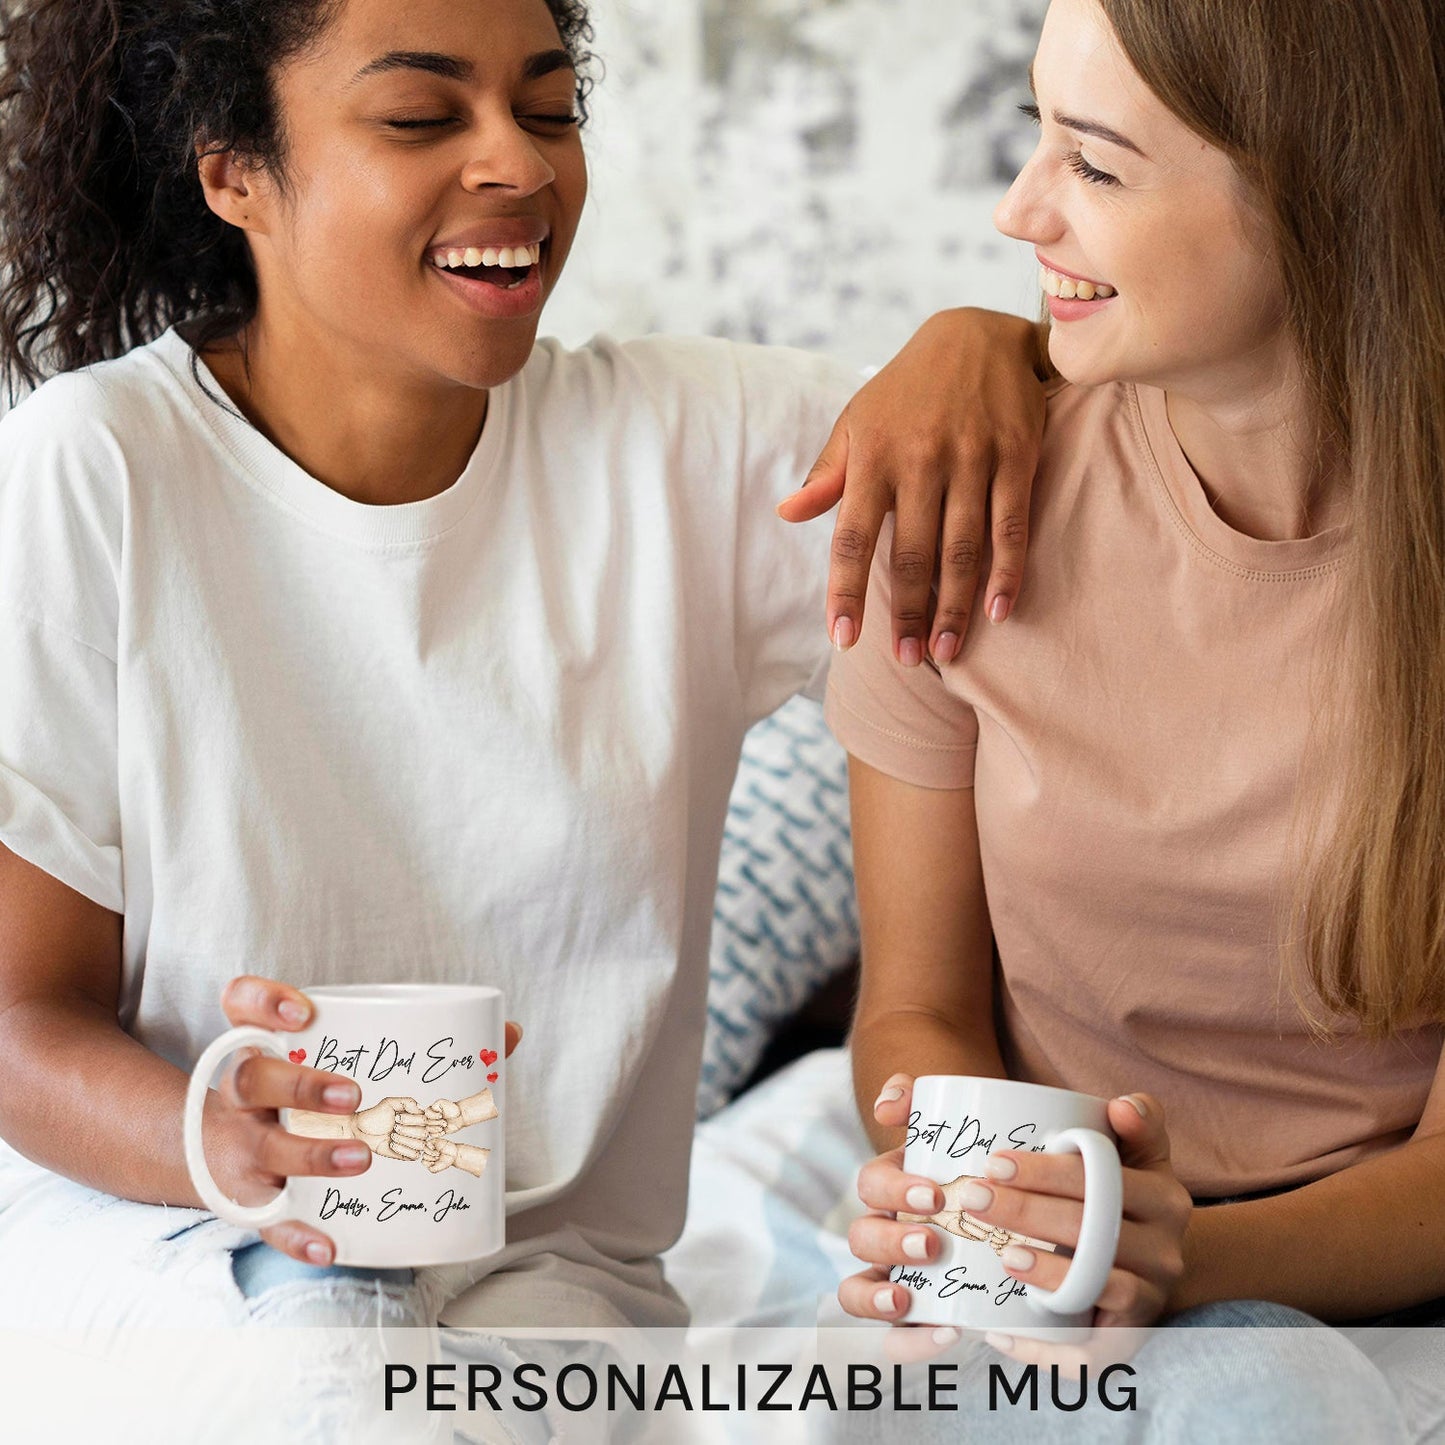 Best Dad ever - Personalized Father's Day gift for Dad - Custom Mug - MyMindfulGifts